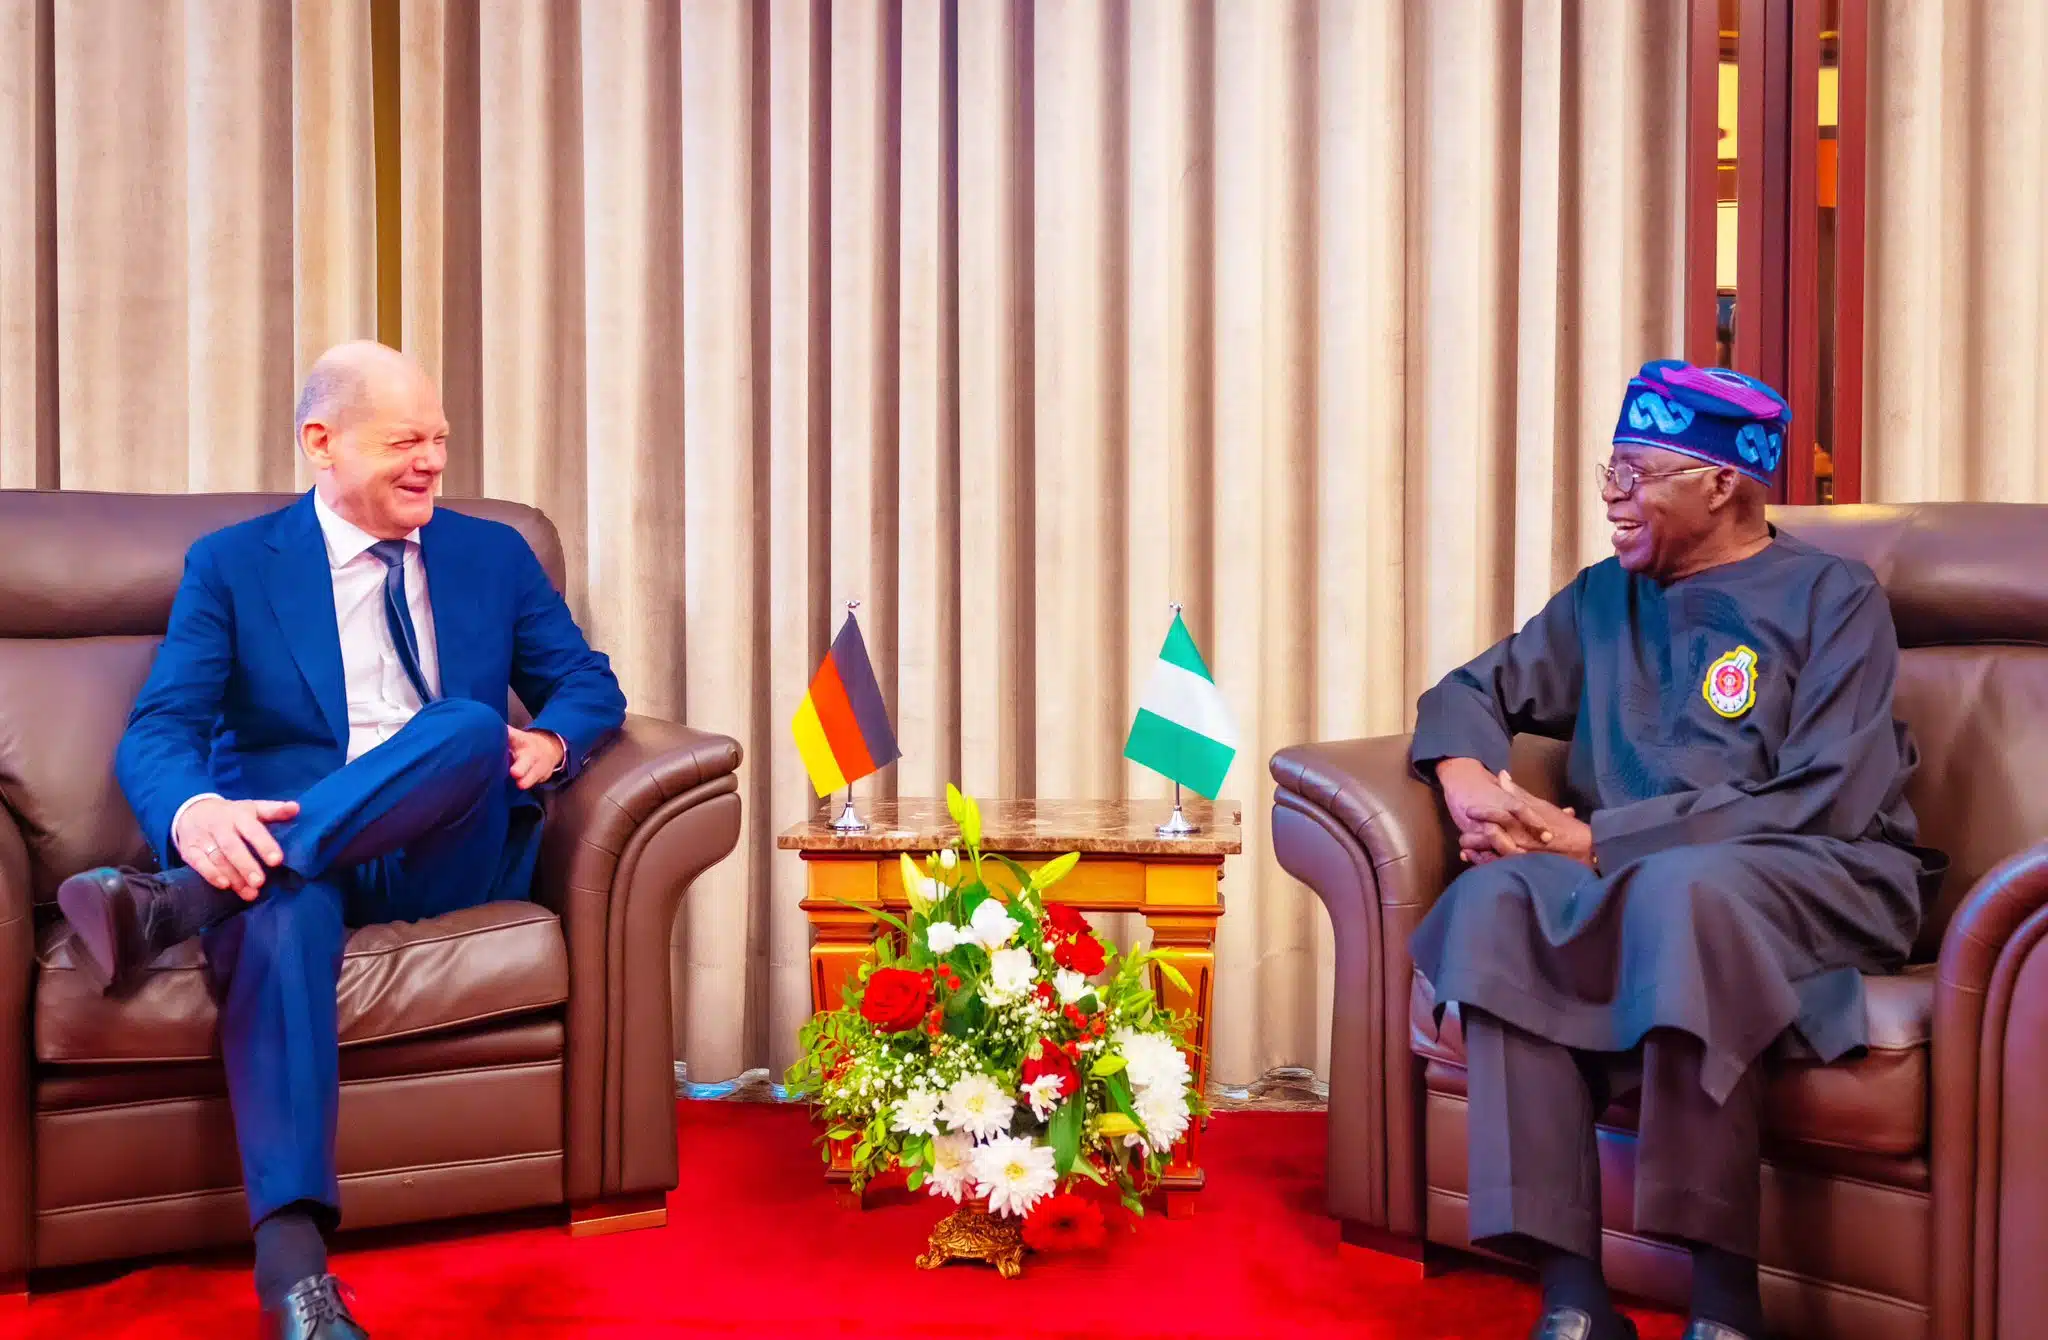 Tinubu, Chancellor Scholz Discuss German Investments In Nigeria